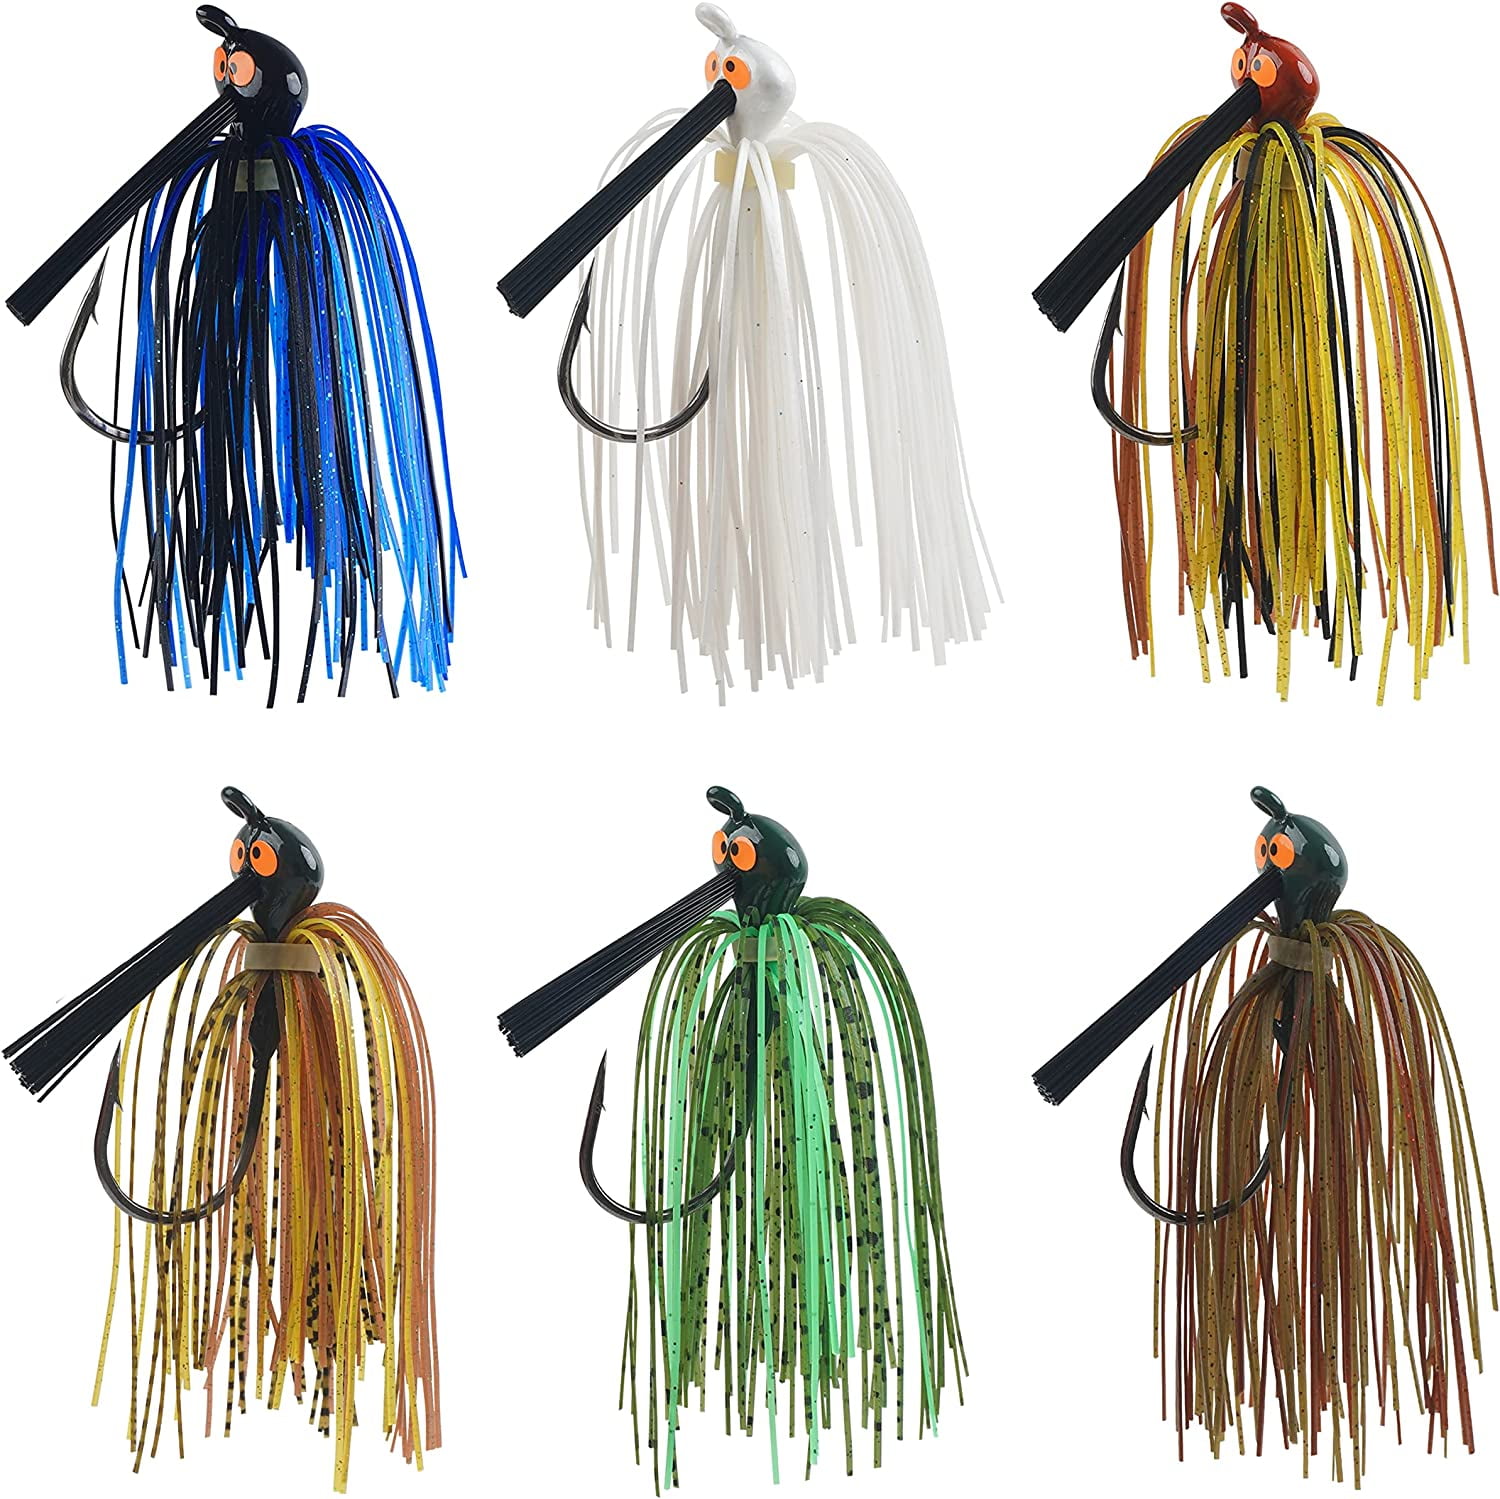 Football Jig for Bass Fishing - 6pcs Football Jig Heads with Weed